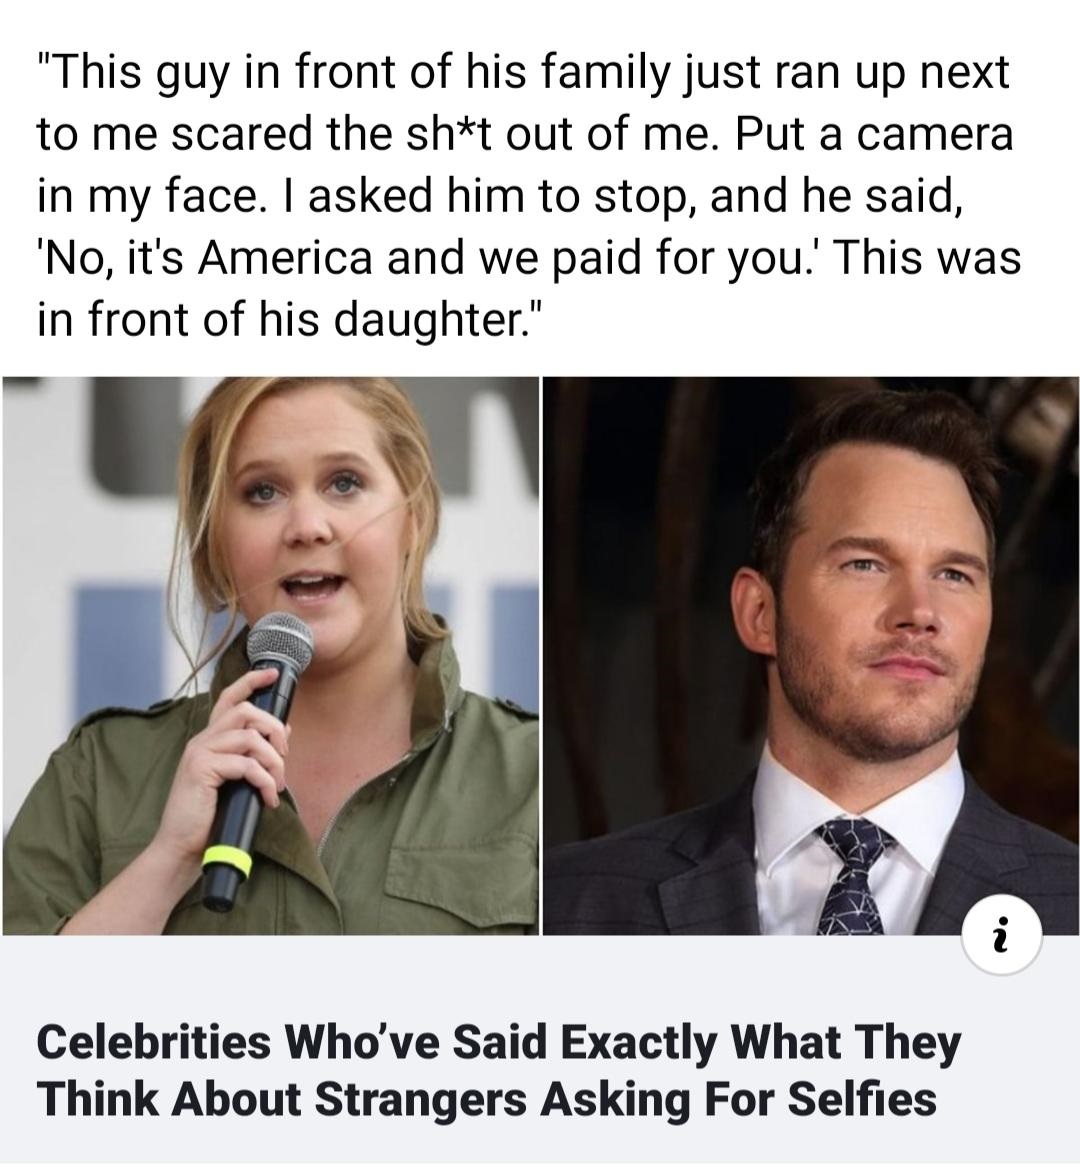 "This guy in front of his family just ran up next to me scared the sht out of me. Put a camera in my face. I asked him to stop, and he said, 'No, it's America and we paid for you.' This was in front of his daughter." Celebrities Who've Said Exactly What…